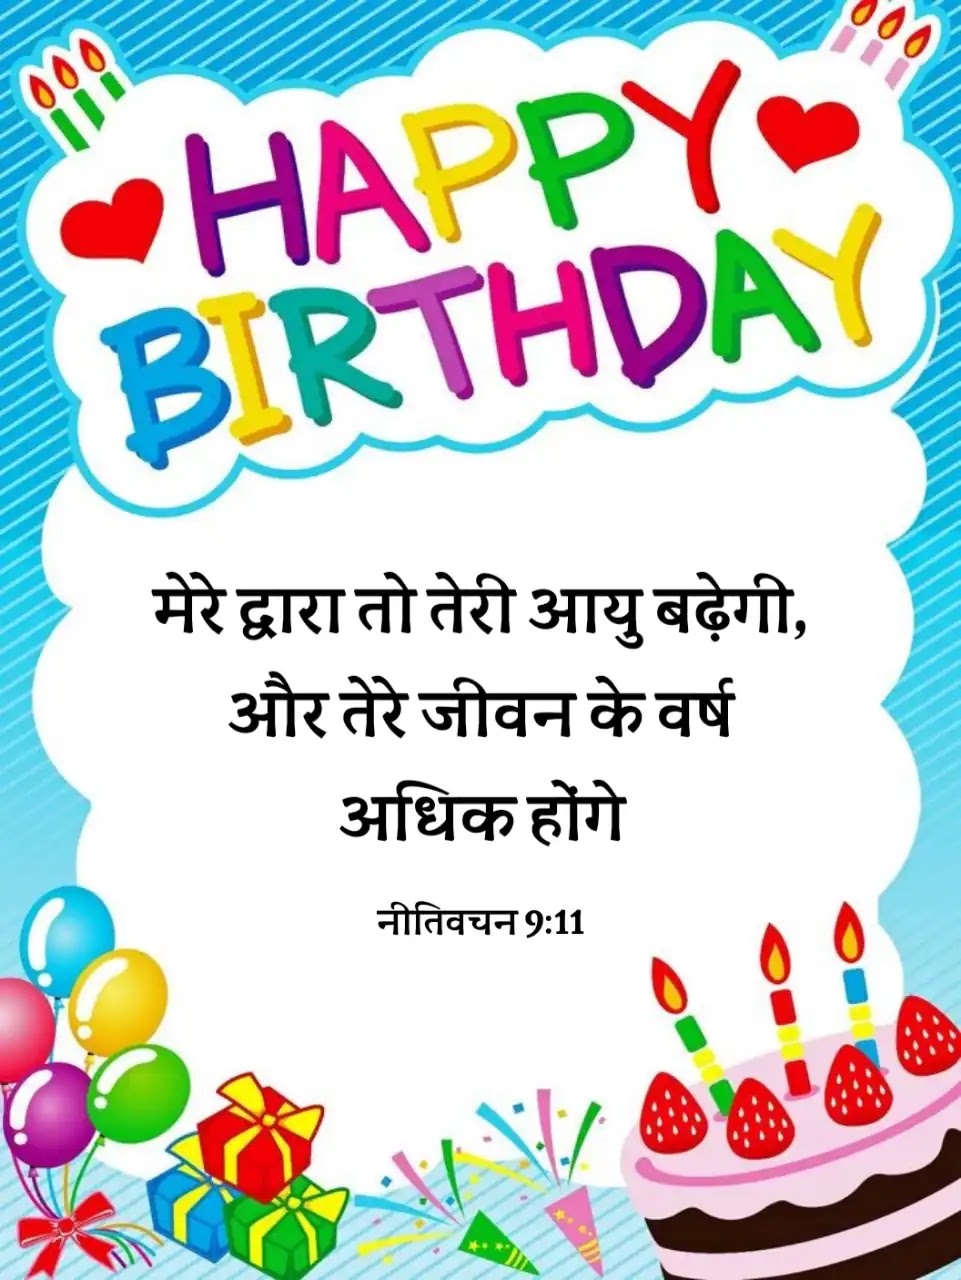 Happy Birthday Wishes Images With Bible Verses In Hindi - Click Bibles